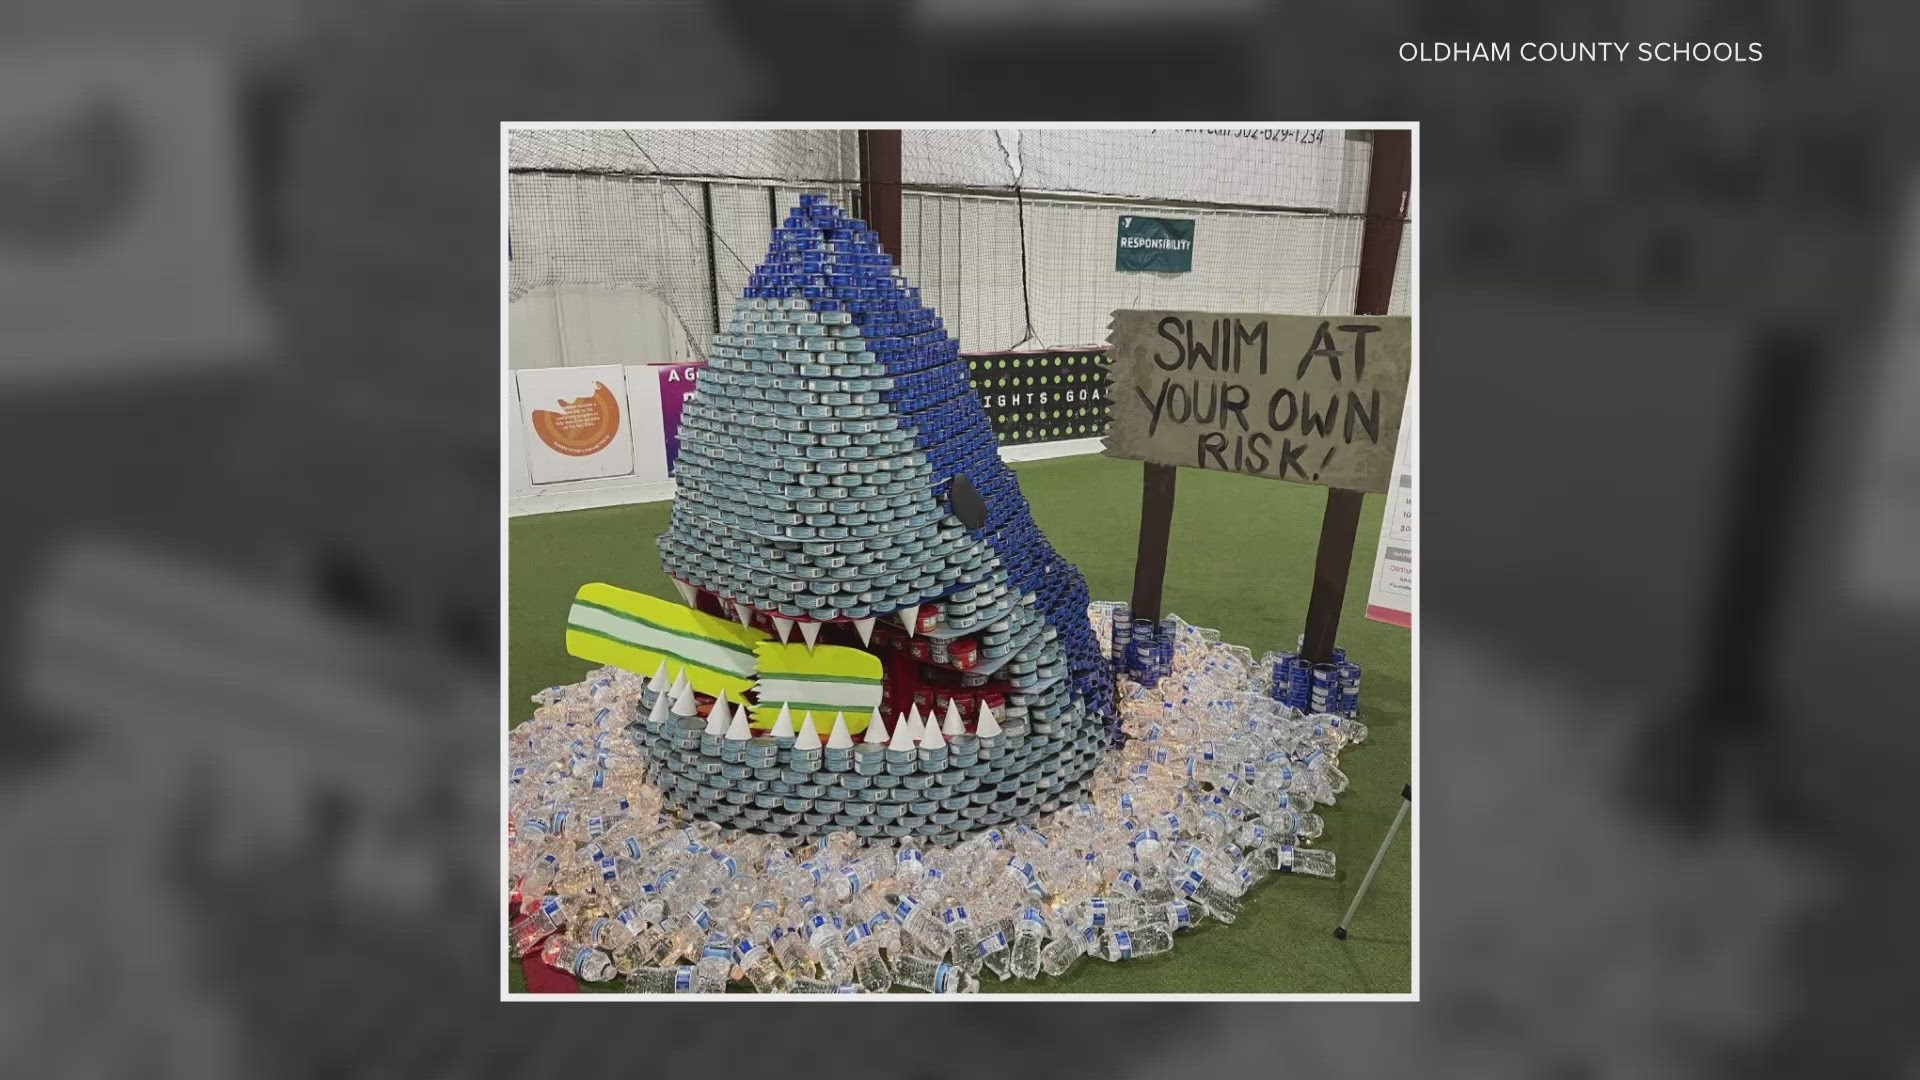 They built it out of tuna cans, Chef Boyardee cans and water bottles. All of the food and water went to the HighPoint food kitchen to support Oldham County families.